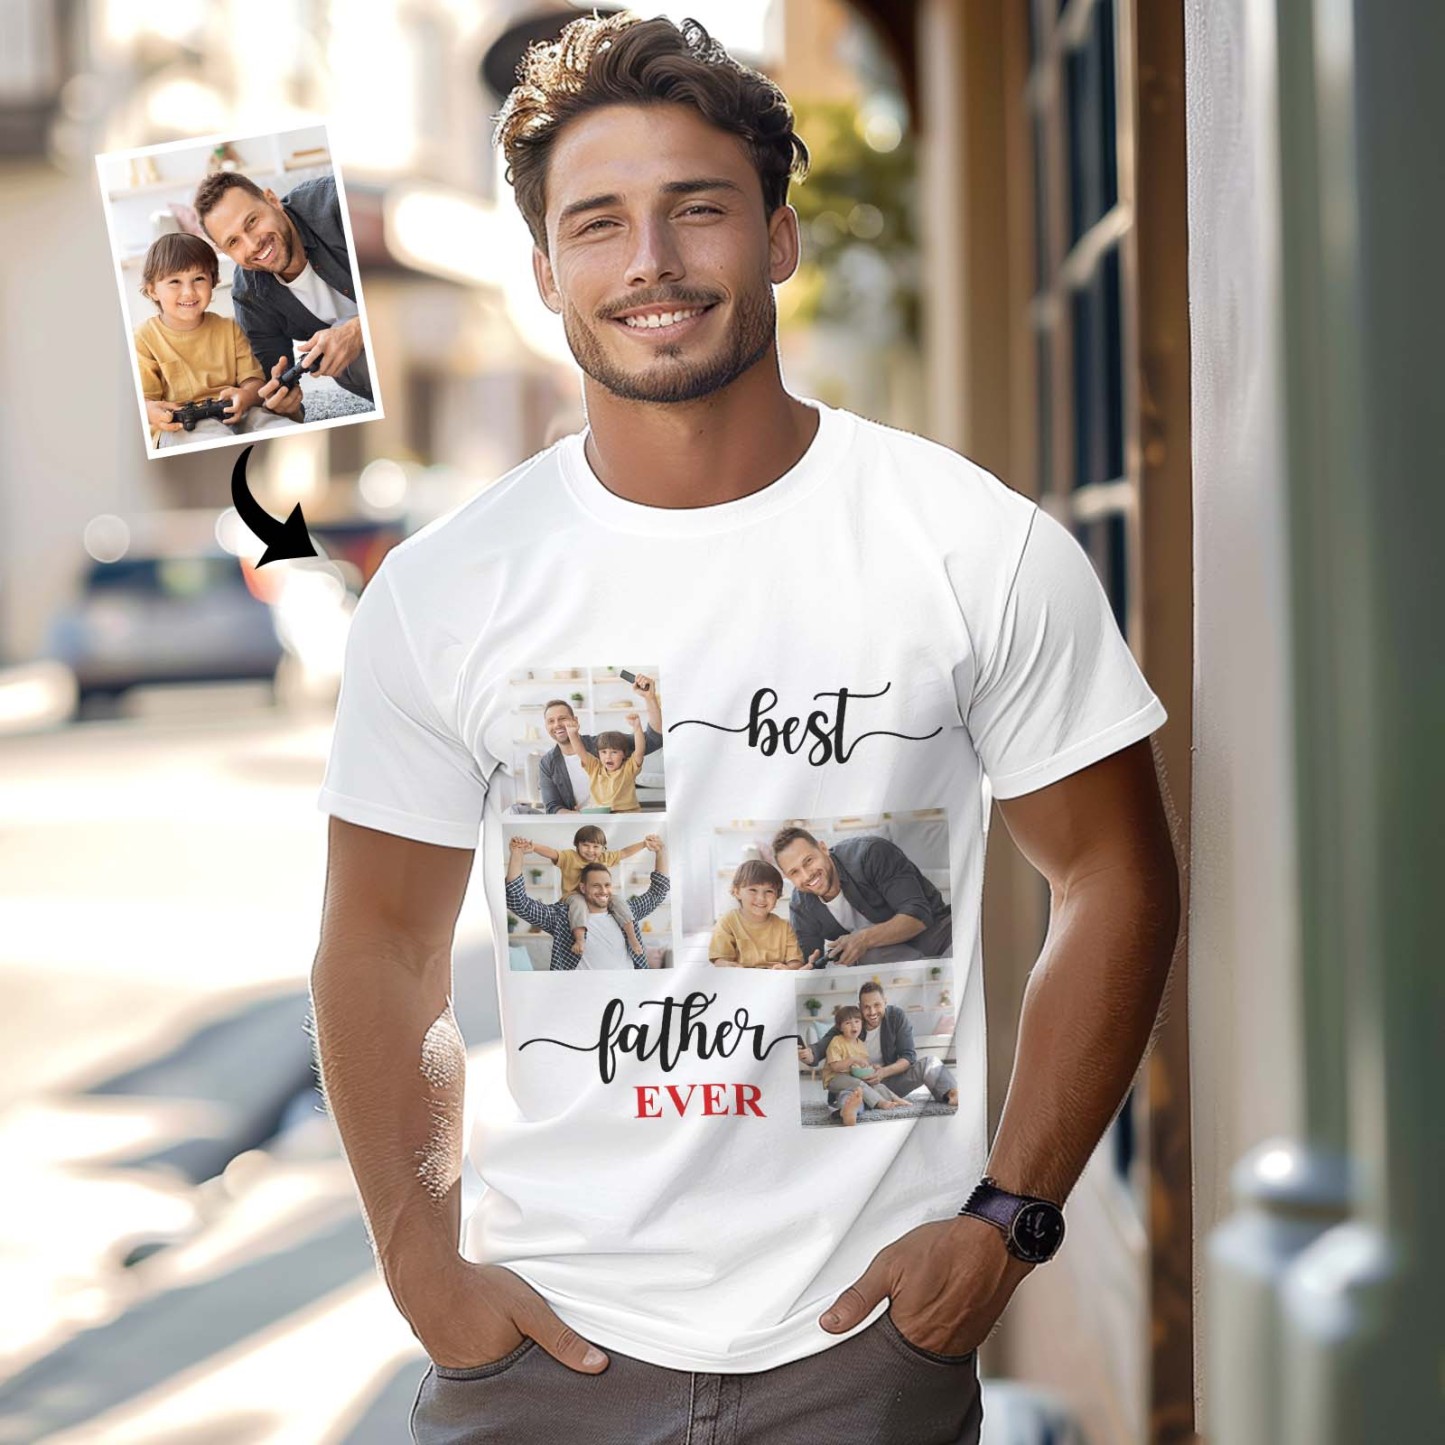 Custom 4 Photos T-Shirt Personalized Photo T-Shirt Best Father Ever Father's Day Gift Family T-Shirt - MyPhotoSocksAu